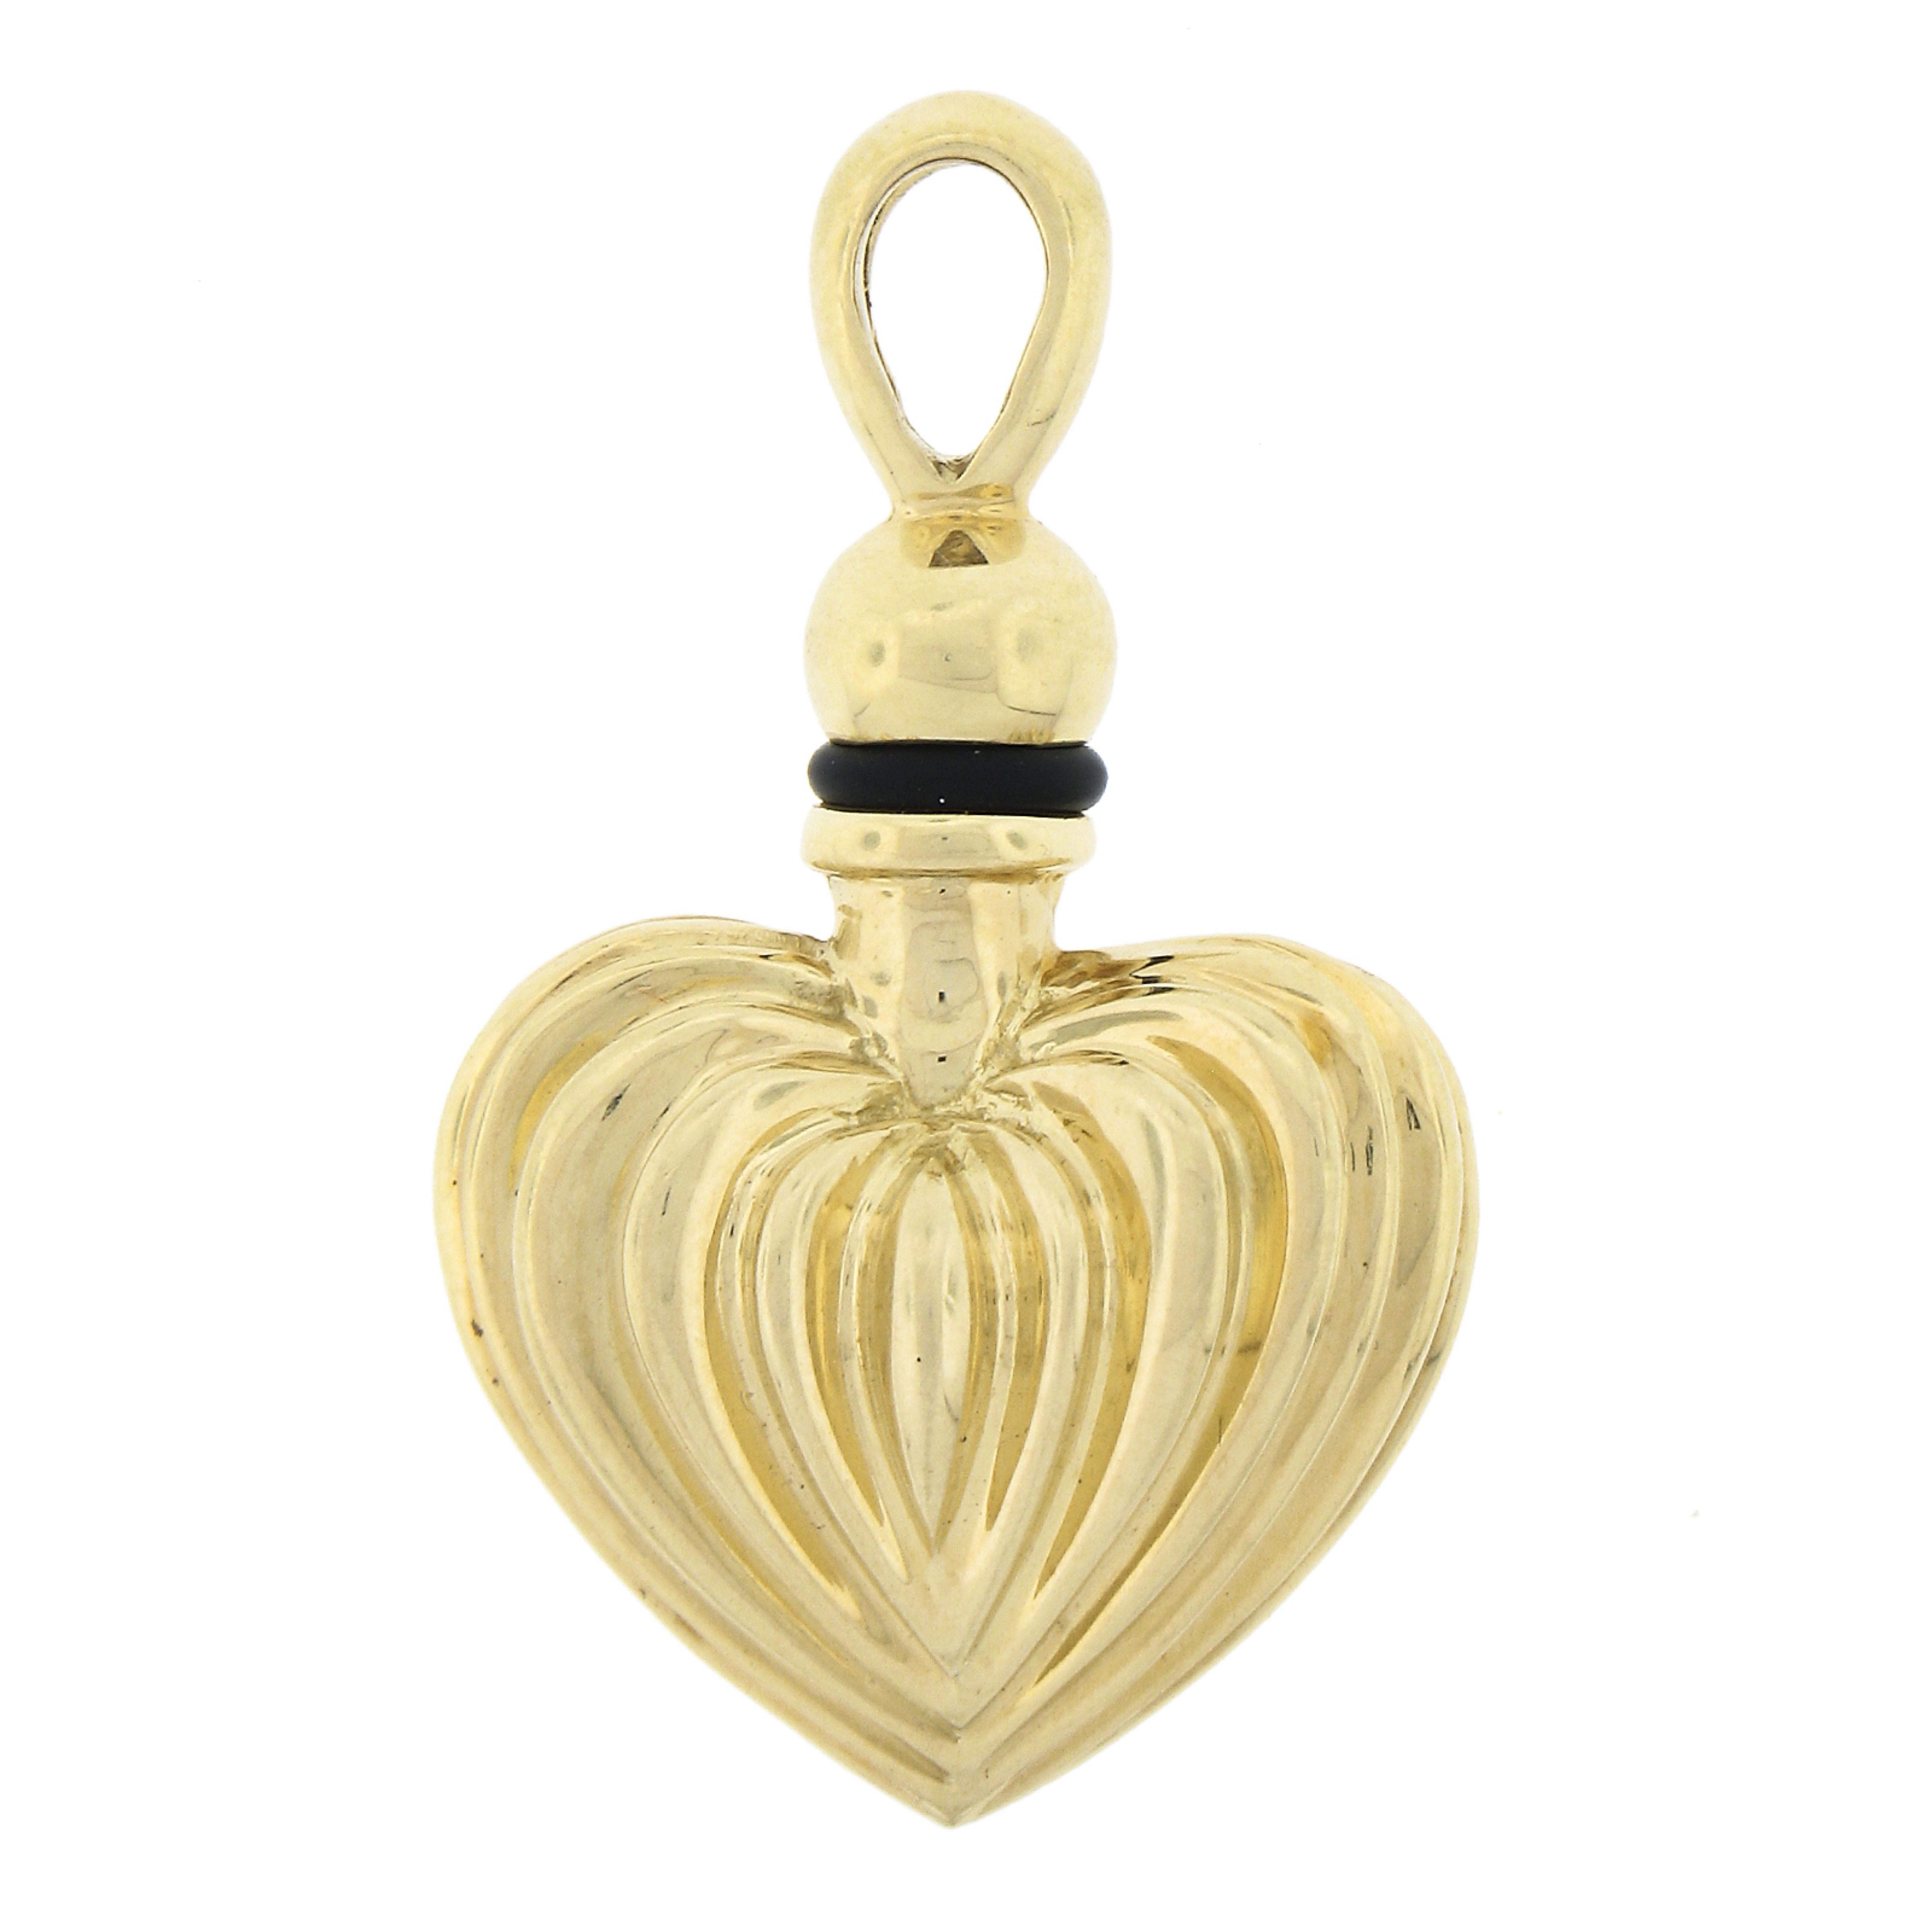 Here we have a beautiful perfume flask charm/pendant by LAGOS is crafted in solid 18k yellow gold and features a puffed fluted heart design that is very well preserved and has its original finish intact. The cap screws off and onto the heart and